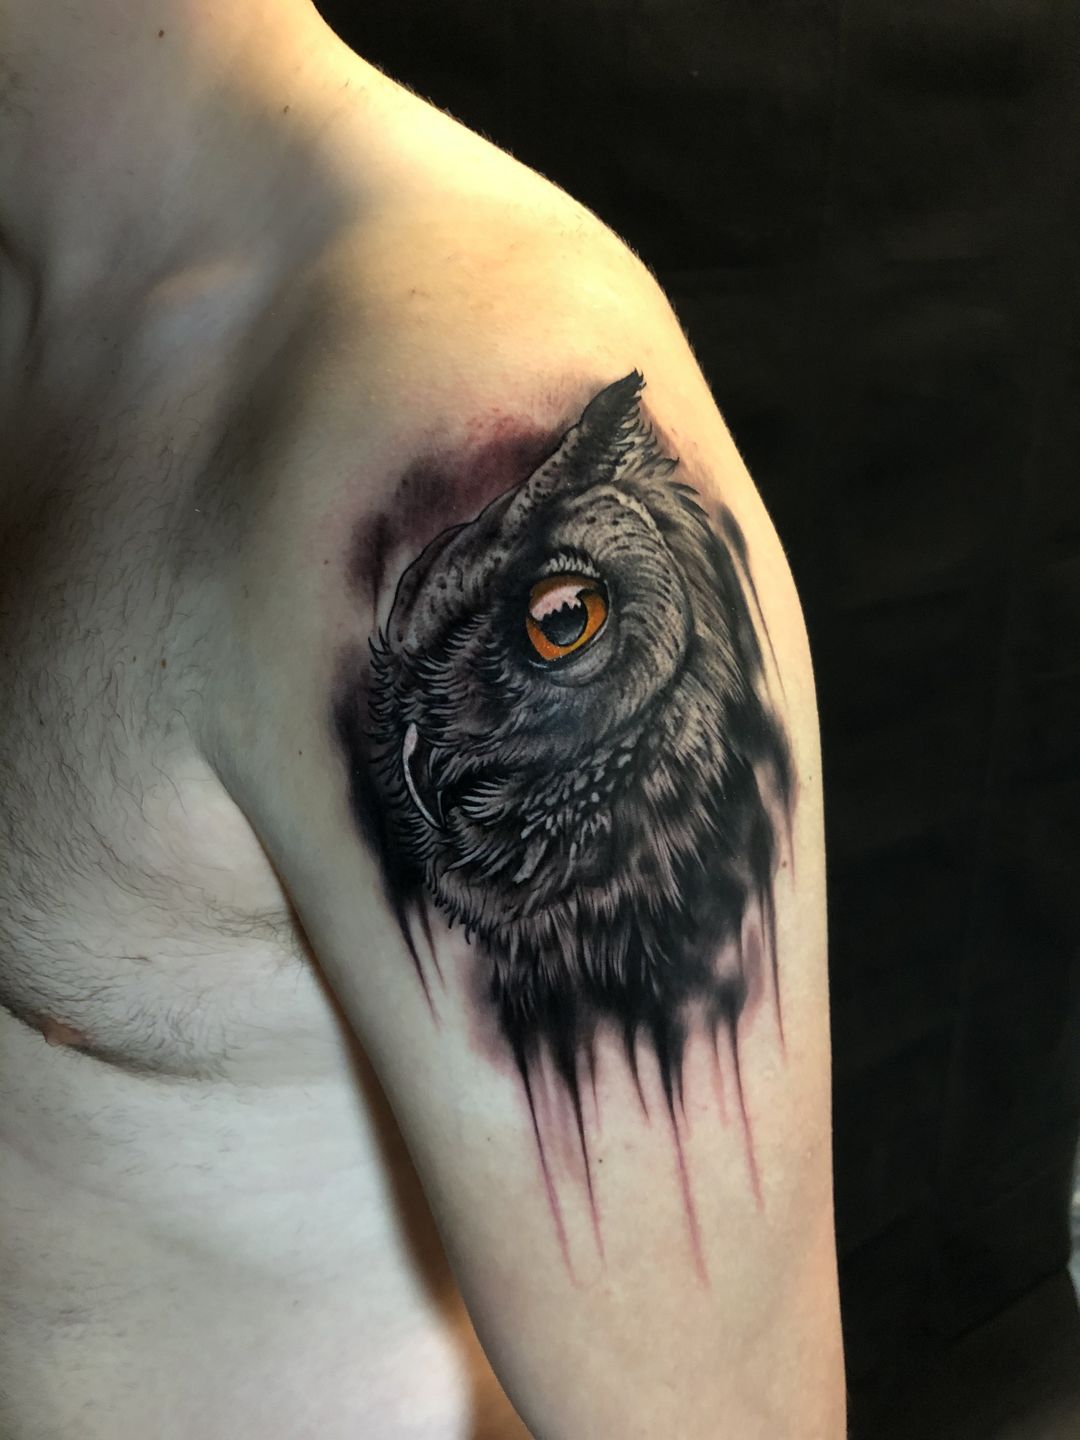 Paradise Tattoo Studio  How amazing is this bird of prey tattoo by  karlleao We love this black and grey realism  For appointments and  enquiries with Karl contact us helloparadisetattoostudioscom 01242